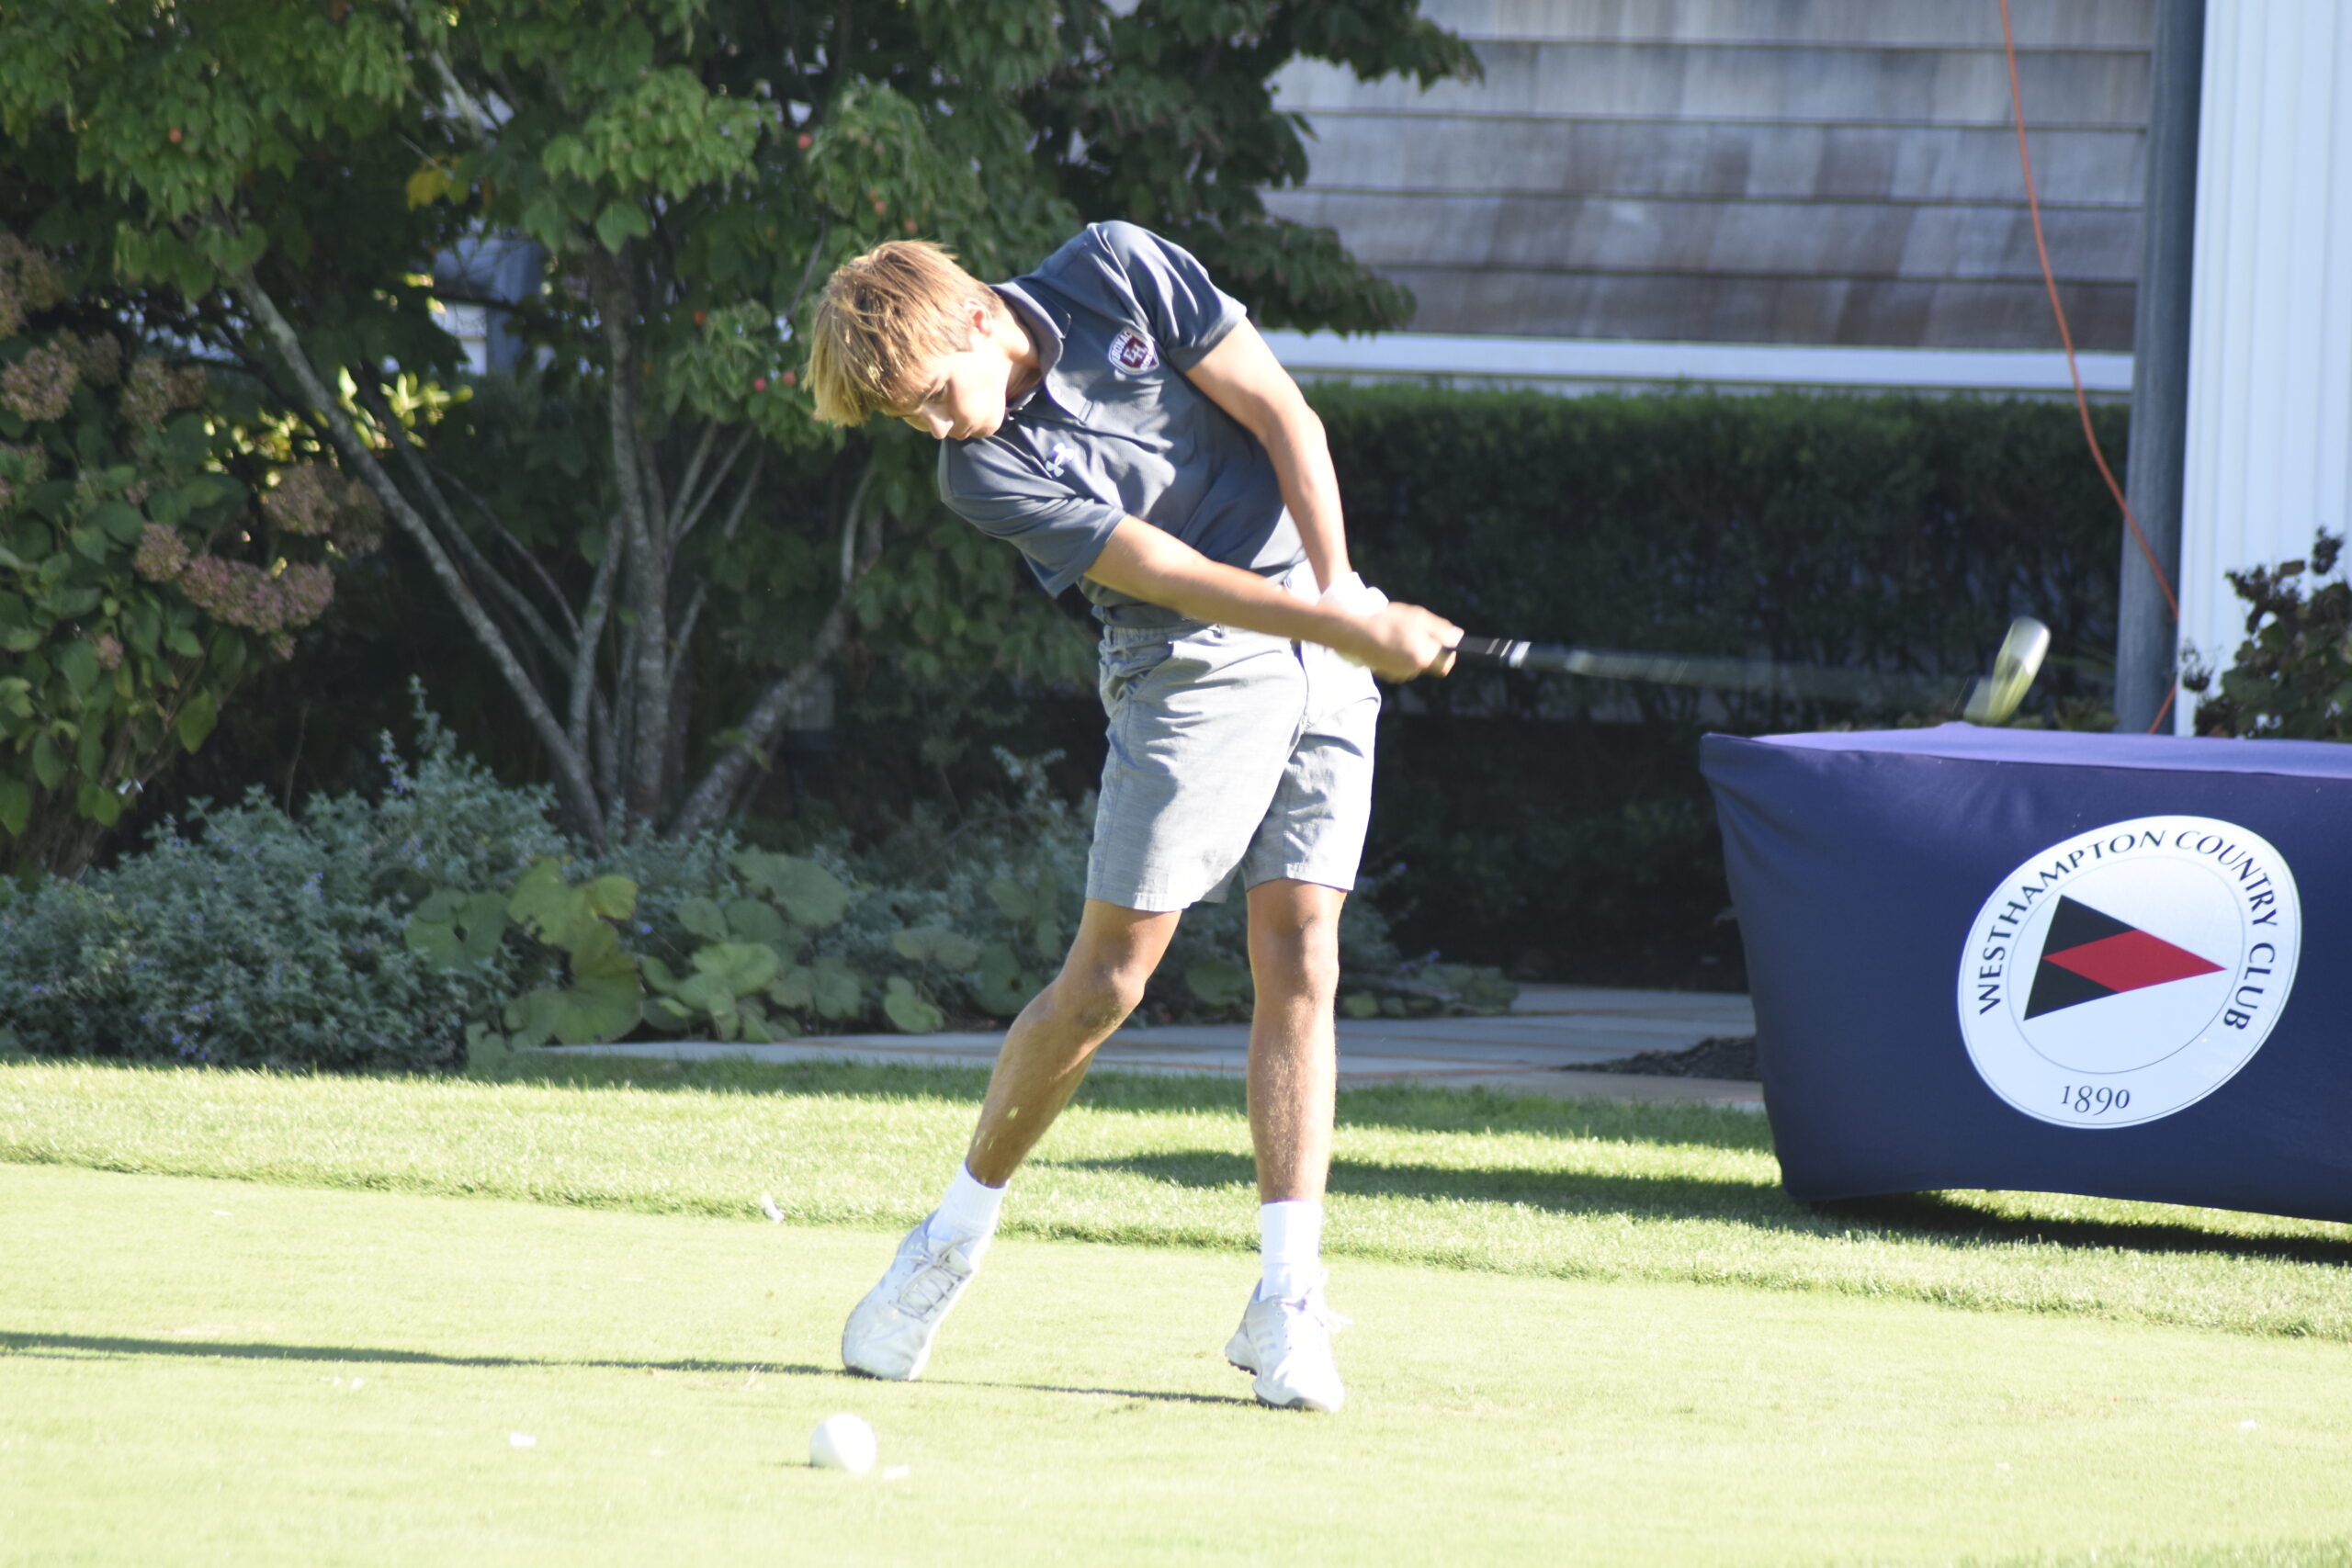 J.P. Amaden tees off for the Bonackers at Westhampton Country Club on September 15.   DREW BUDD